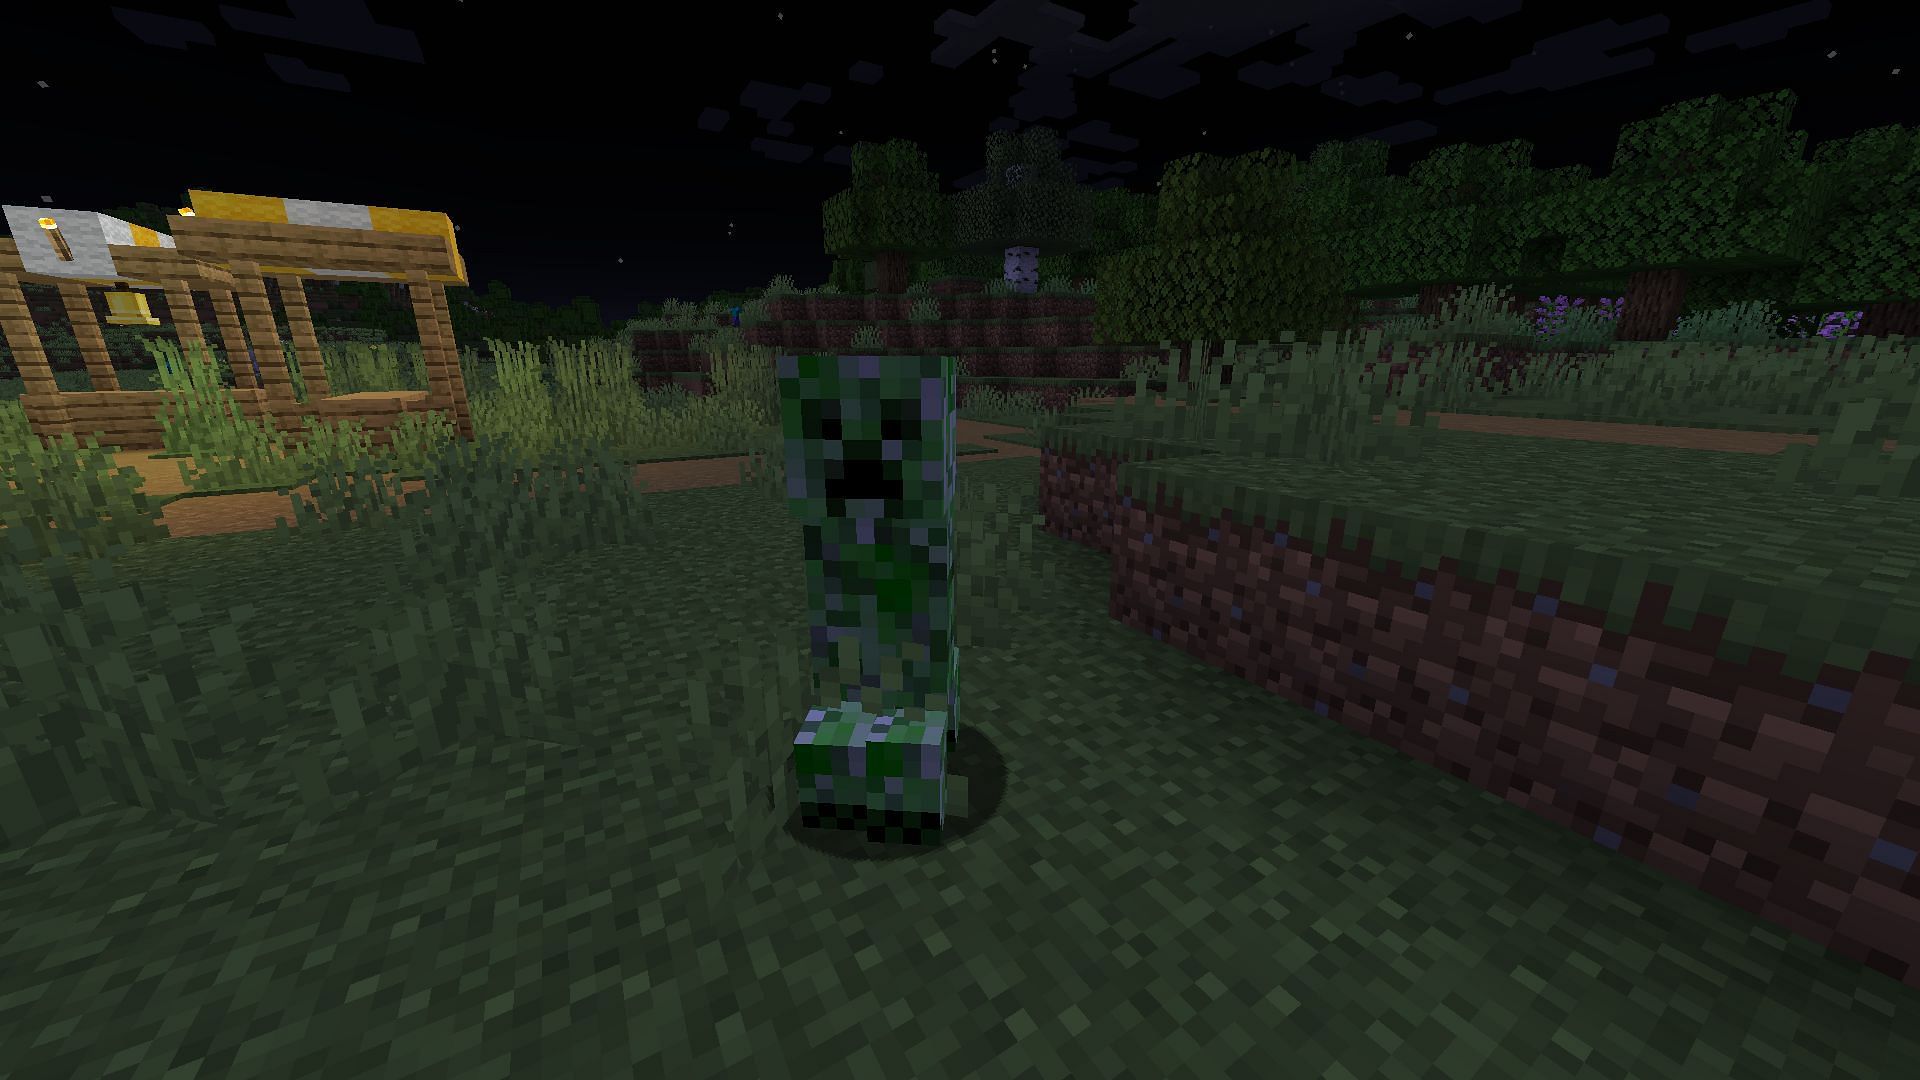 At night, hostile mobs start spawning since the light level of each block is zero in Minecraft (Image via Mojang)